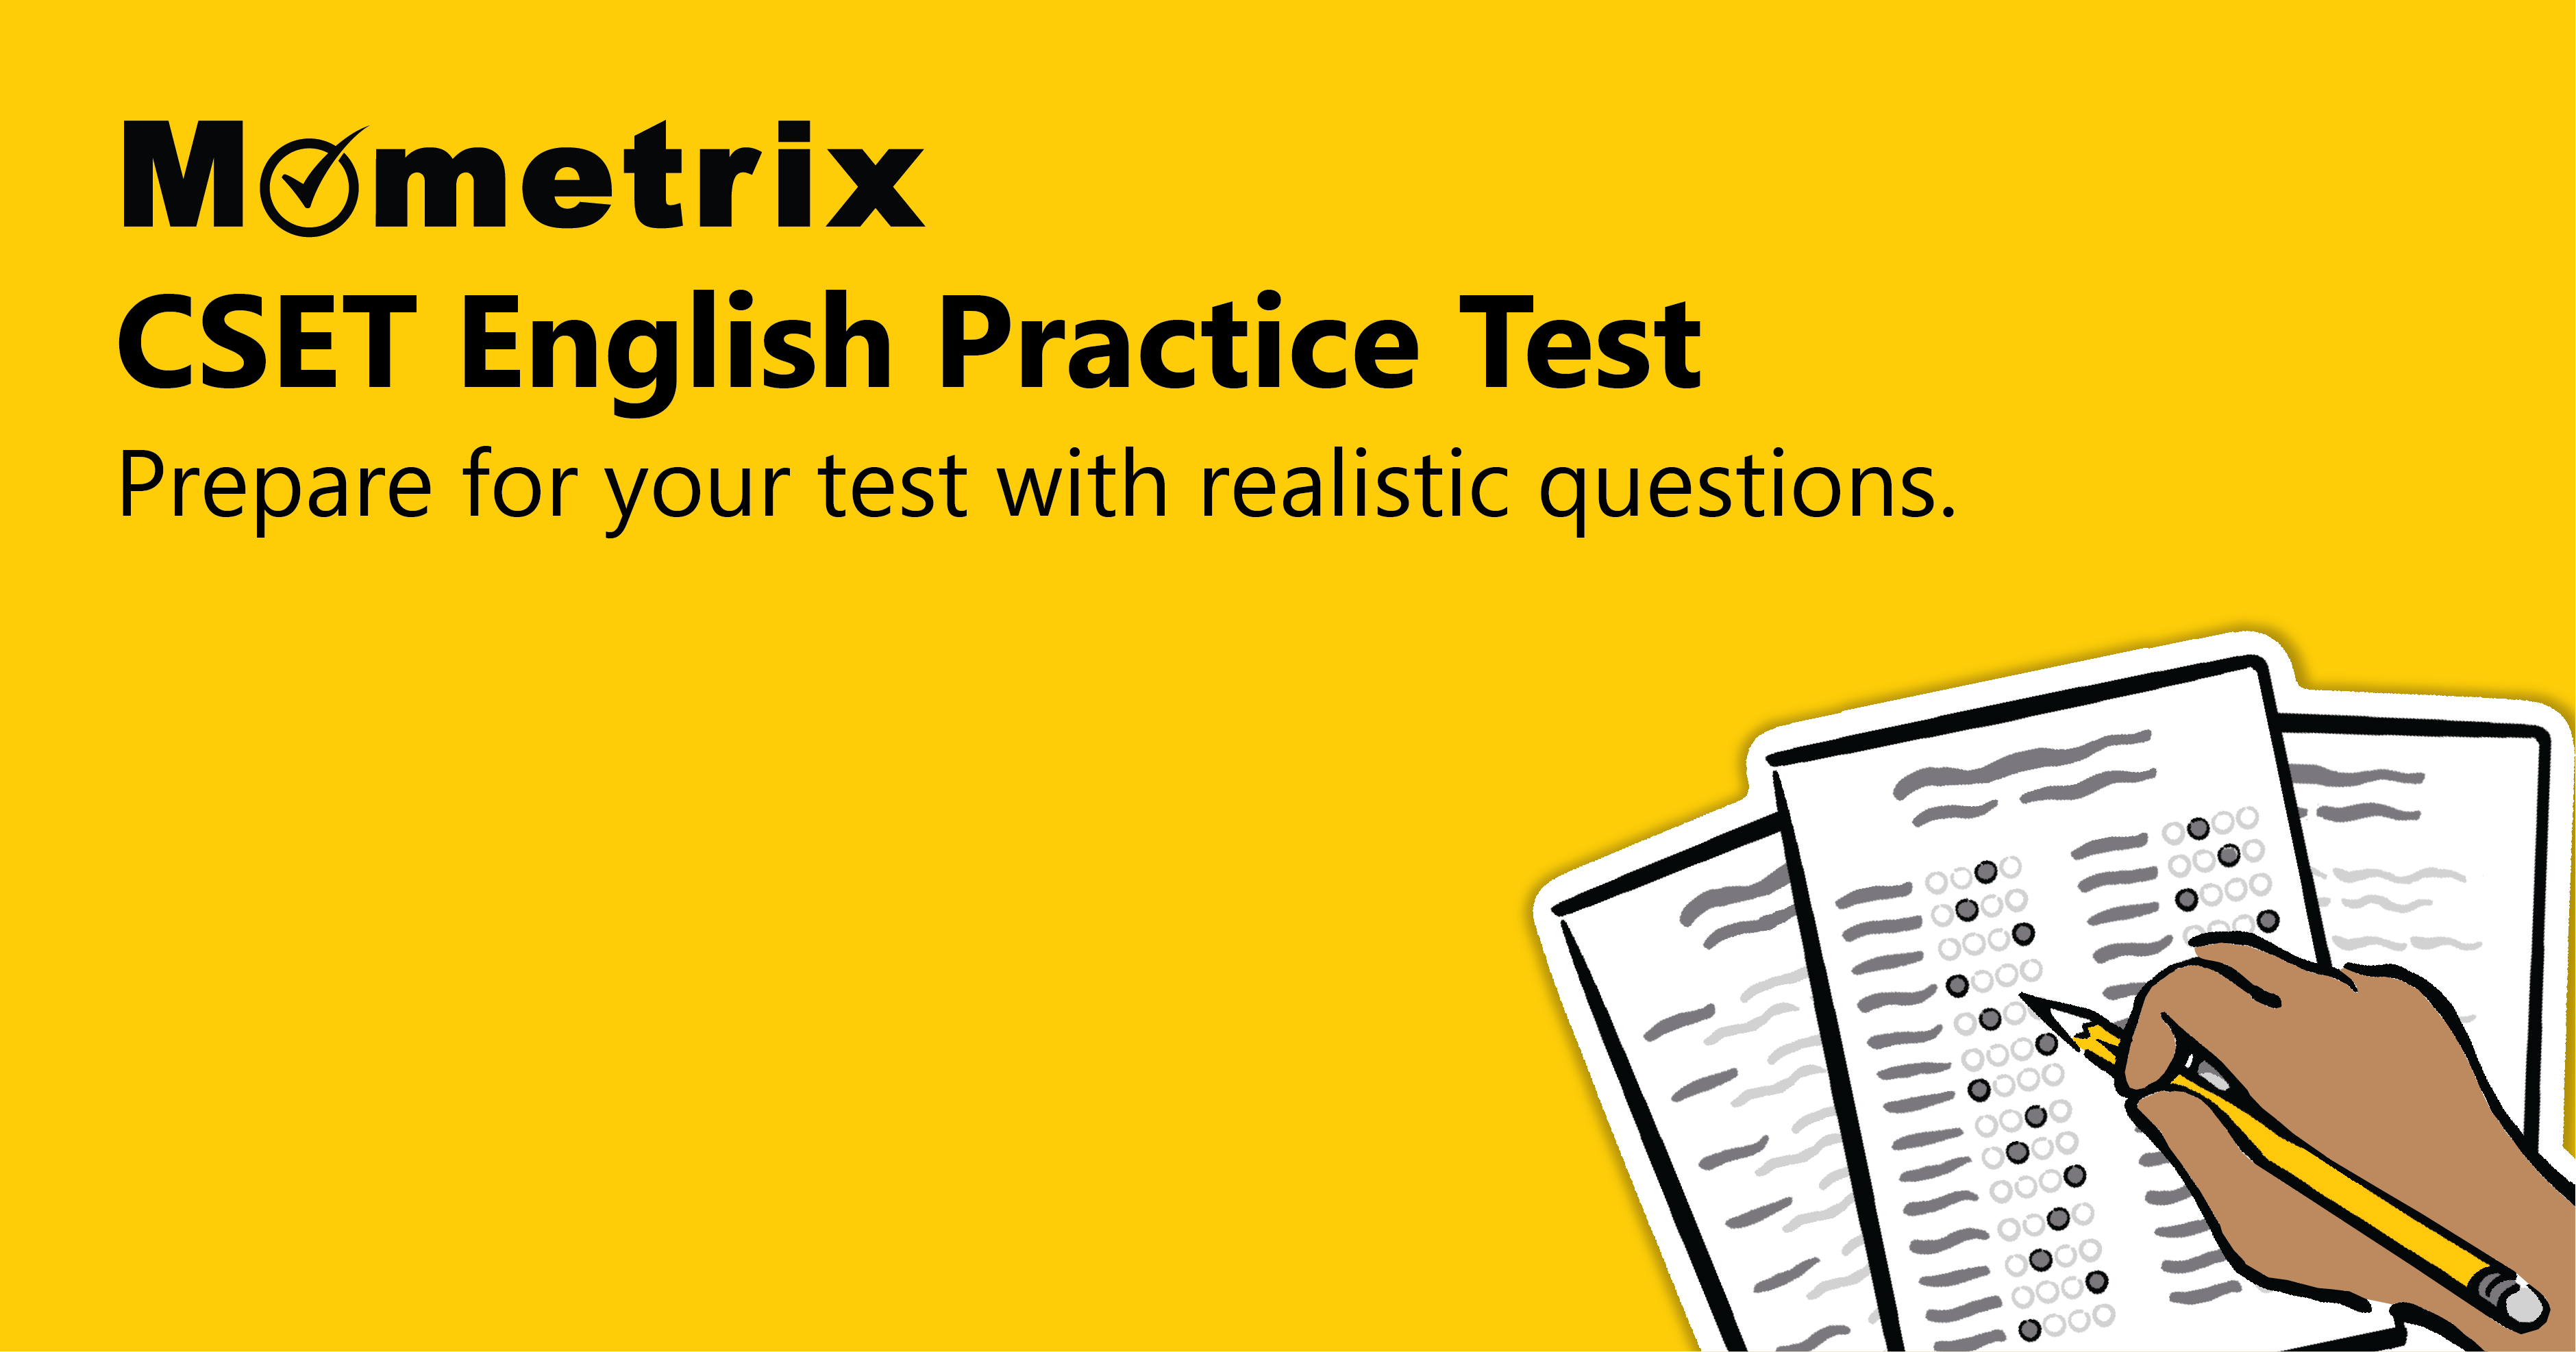 Yellow advertisement image for Mometrix's CSET English Practice Test, featuring an illustration of a hand filling out a multiple-choice test sheet. Text reads: "Prepare for your test with realistic questions.